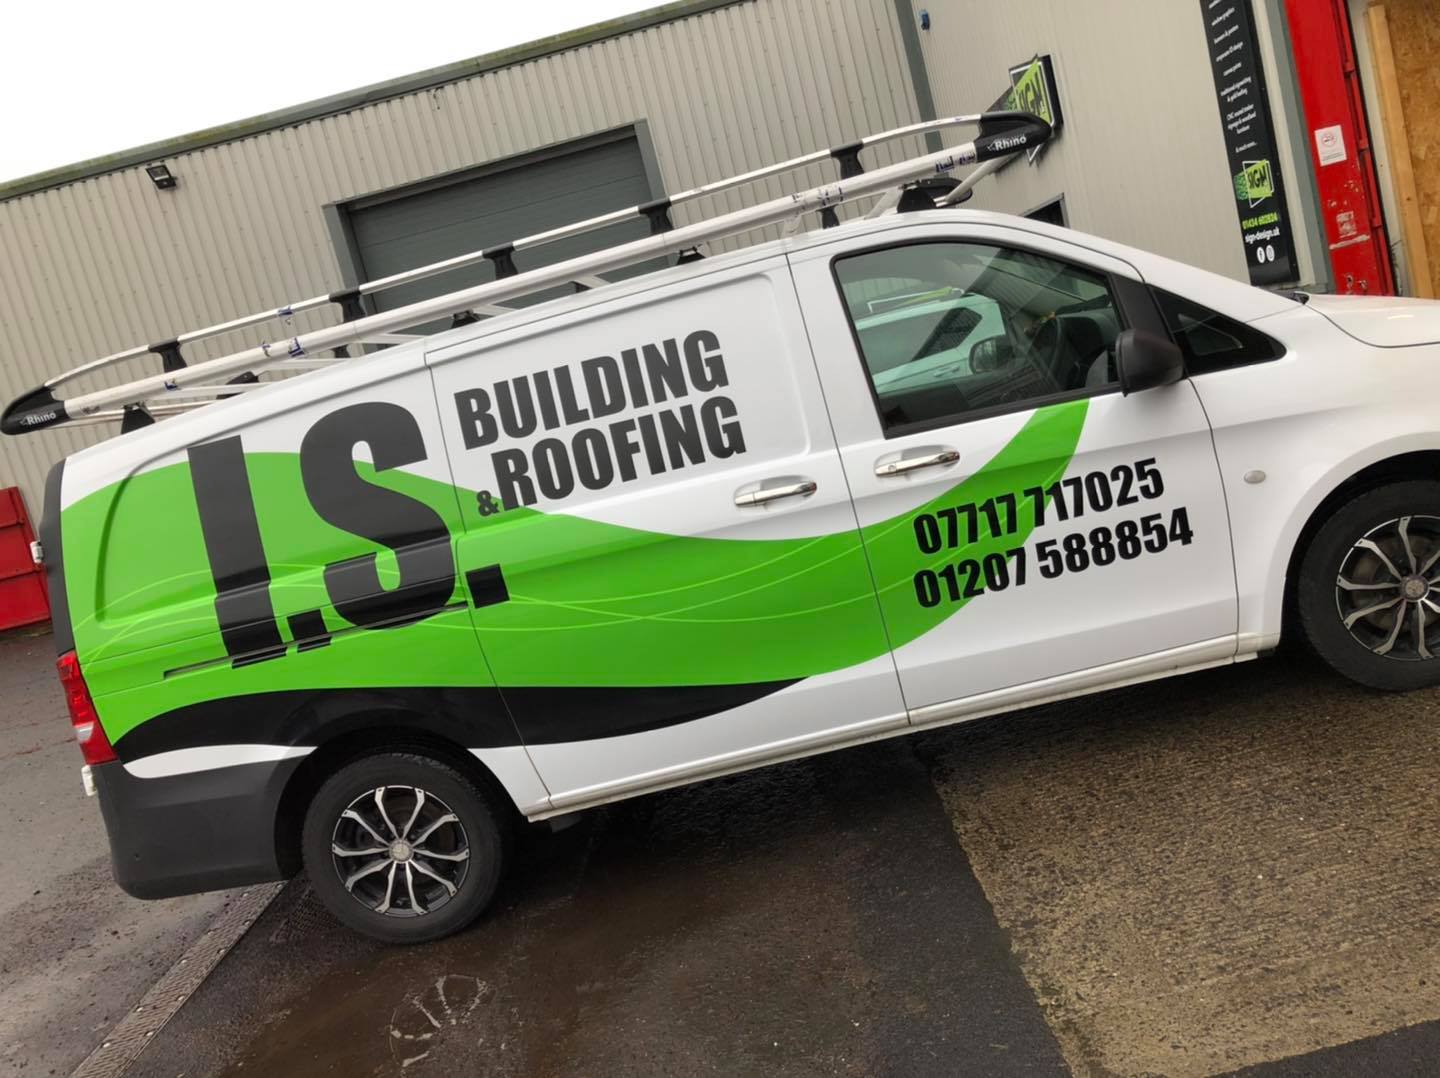 I.S. Building & Roofing